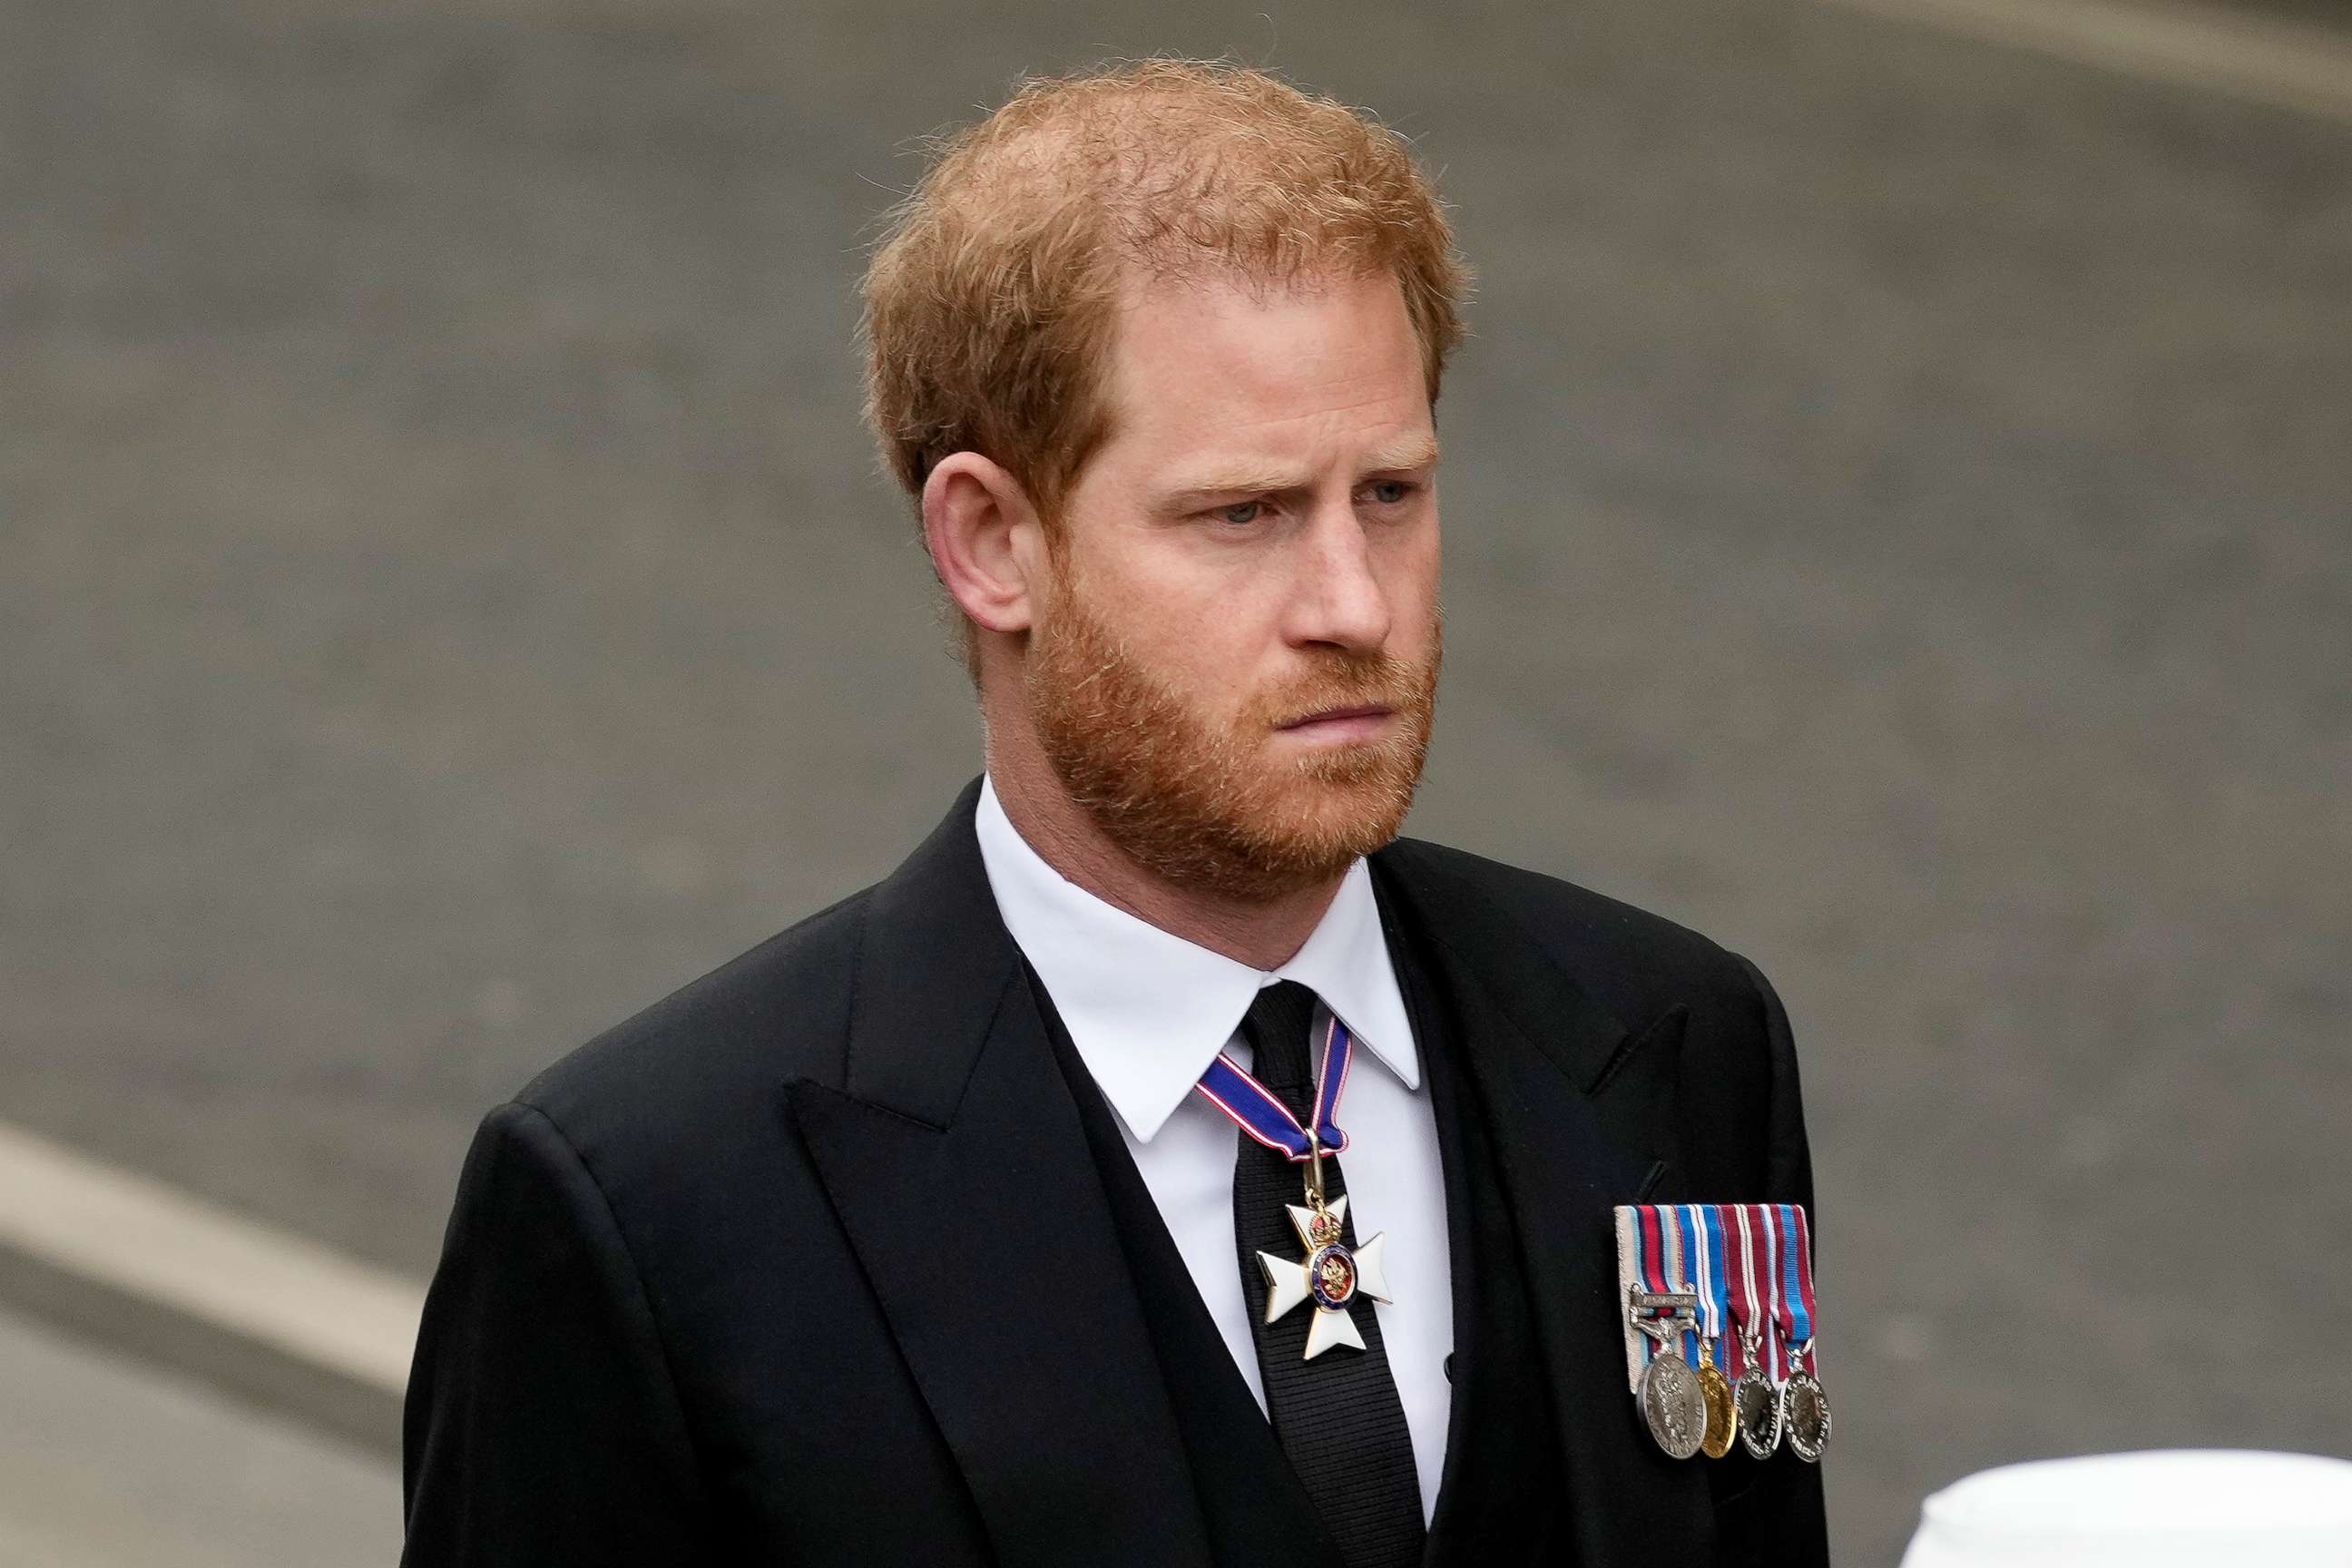 PHOTO: Prince Harry, Duke of Sussex arrive at Westminster Abbey ahead of the State Funeral of Queen Elizabeth II on Sept. 19, 2022 in London.